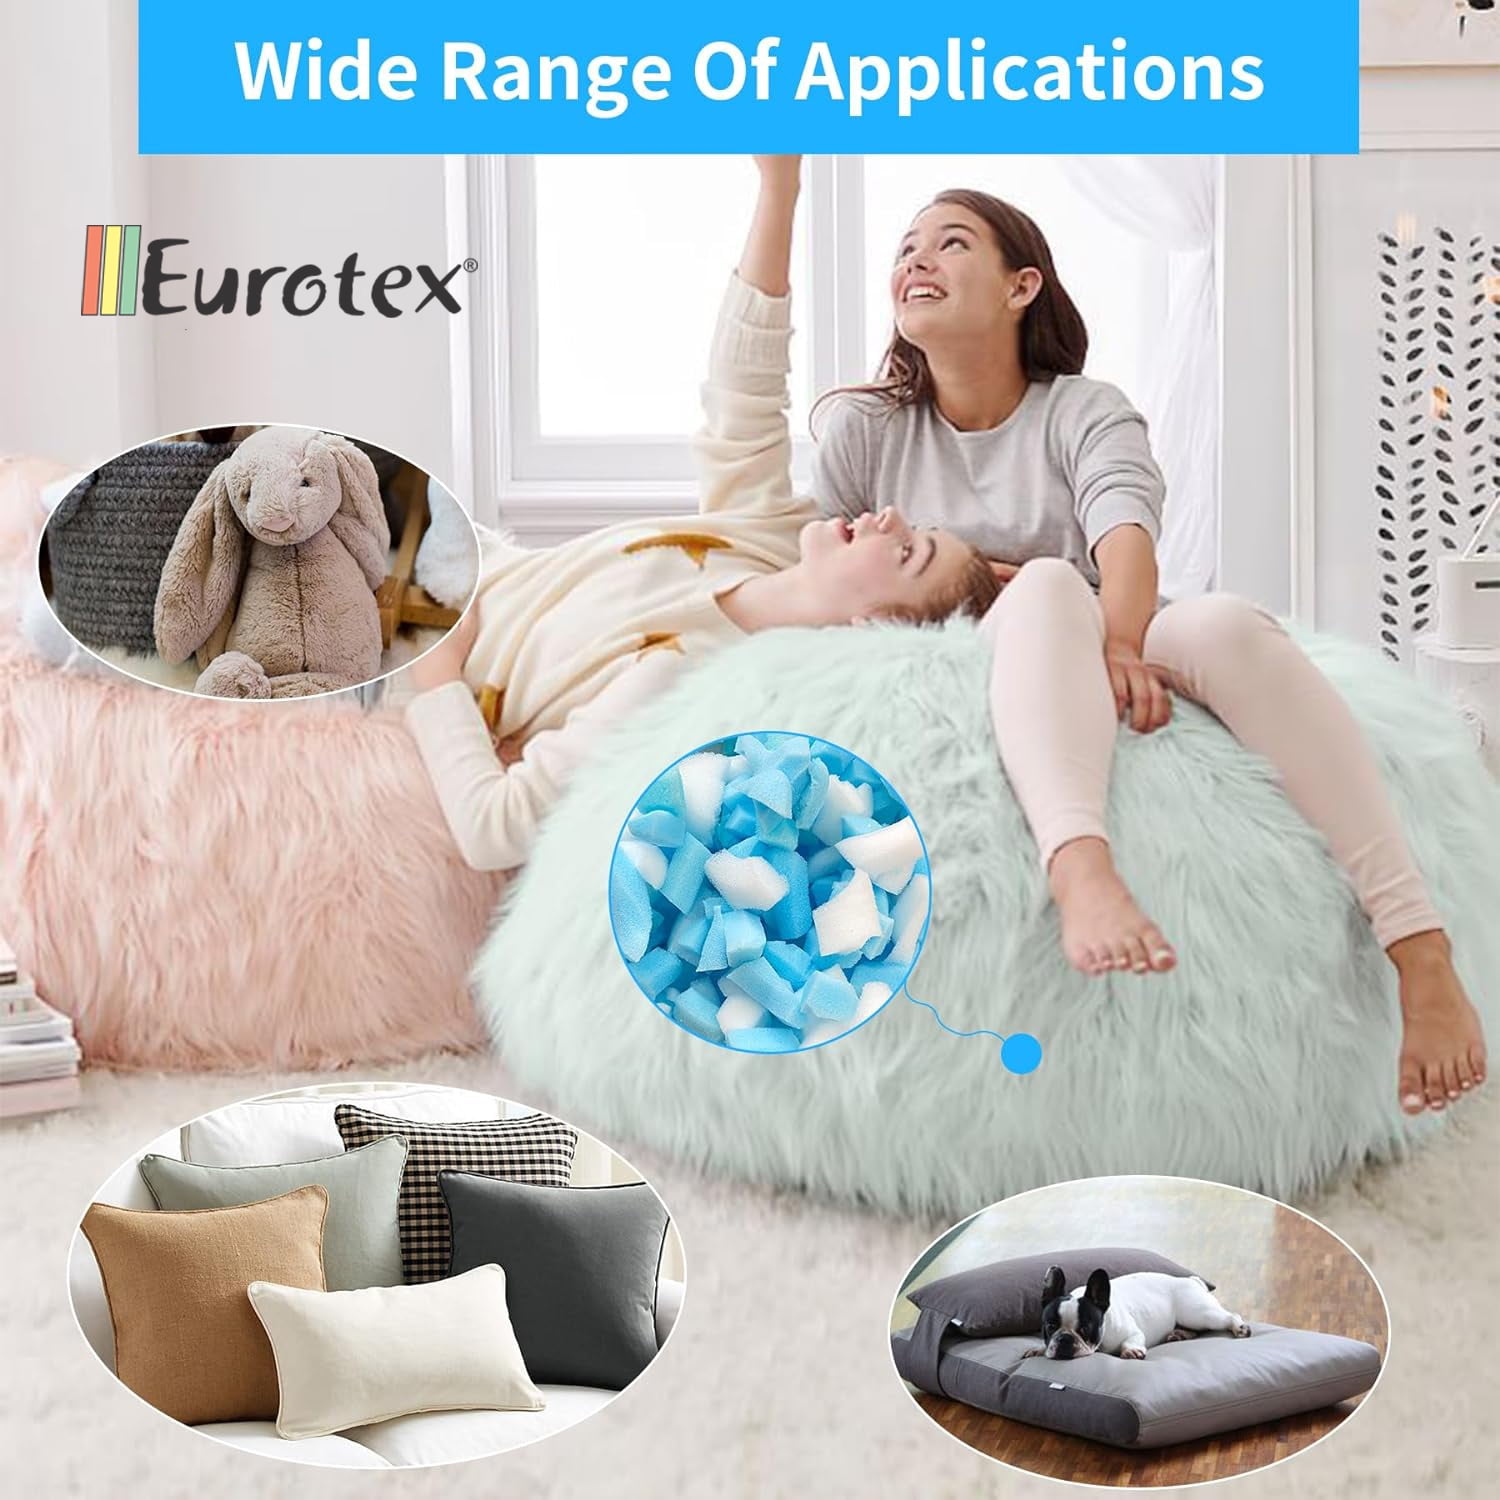 Eurotex Shredded Memory Foam Filling 10lbs for Bean Bag Filler, Particles Refill, Premium Soft and Comfortable Stuffing, Size: 10 lbs